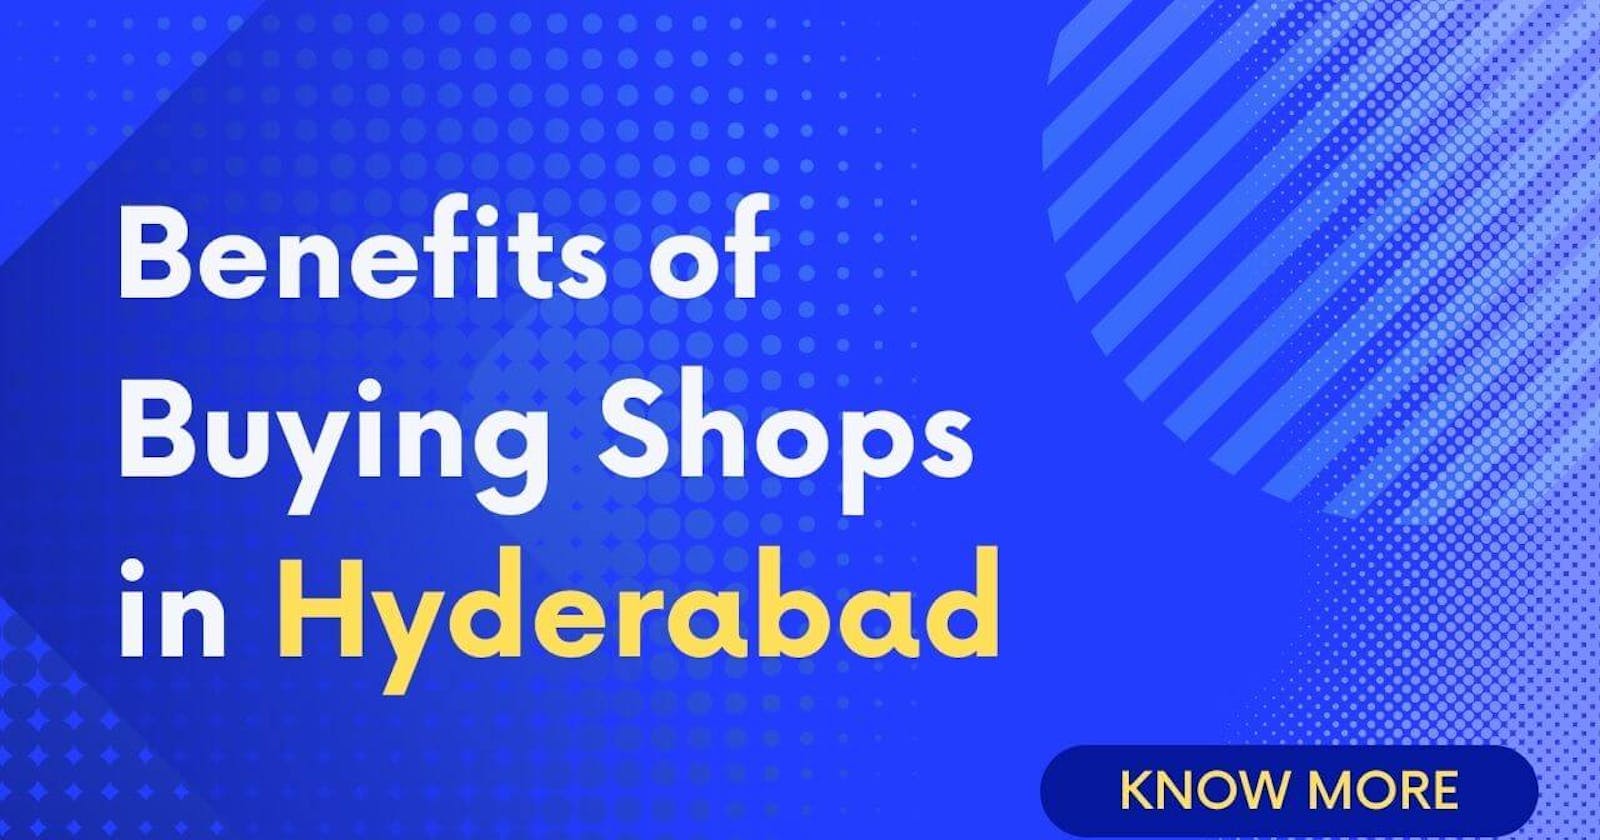 Benefits of Buying Shops in Hyderabad